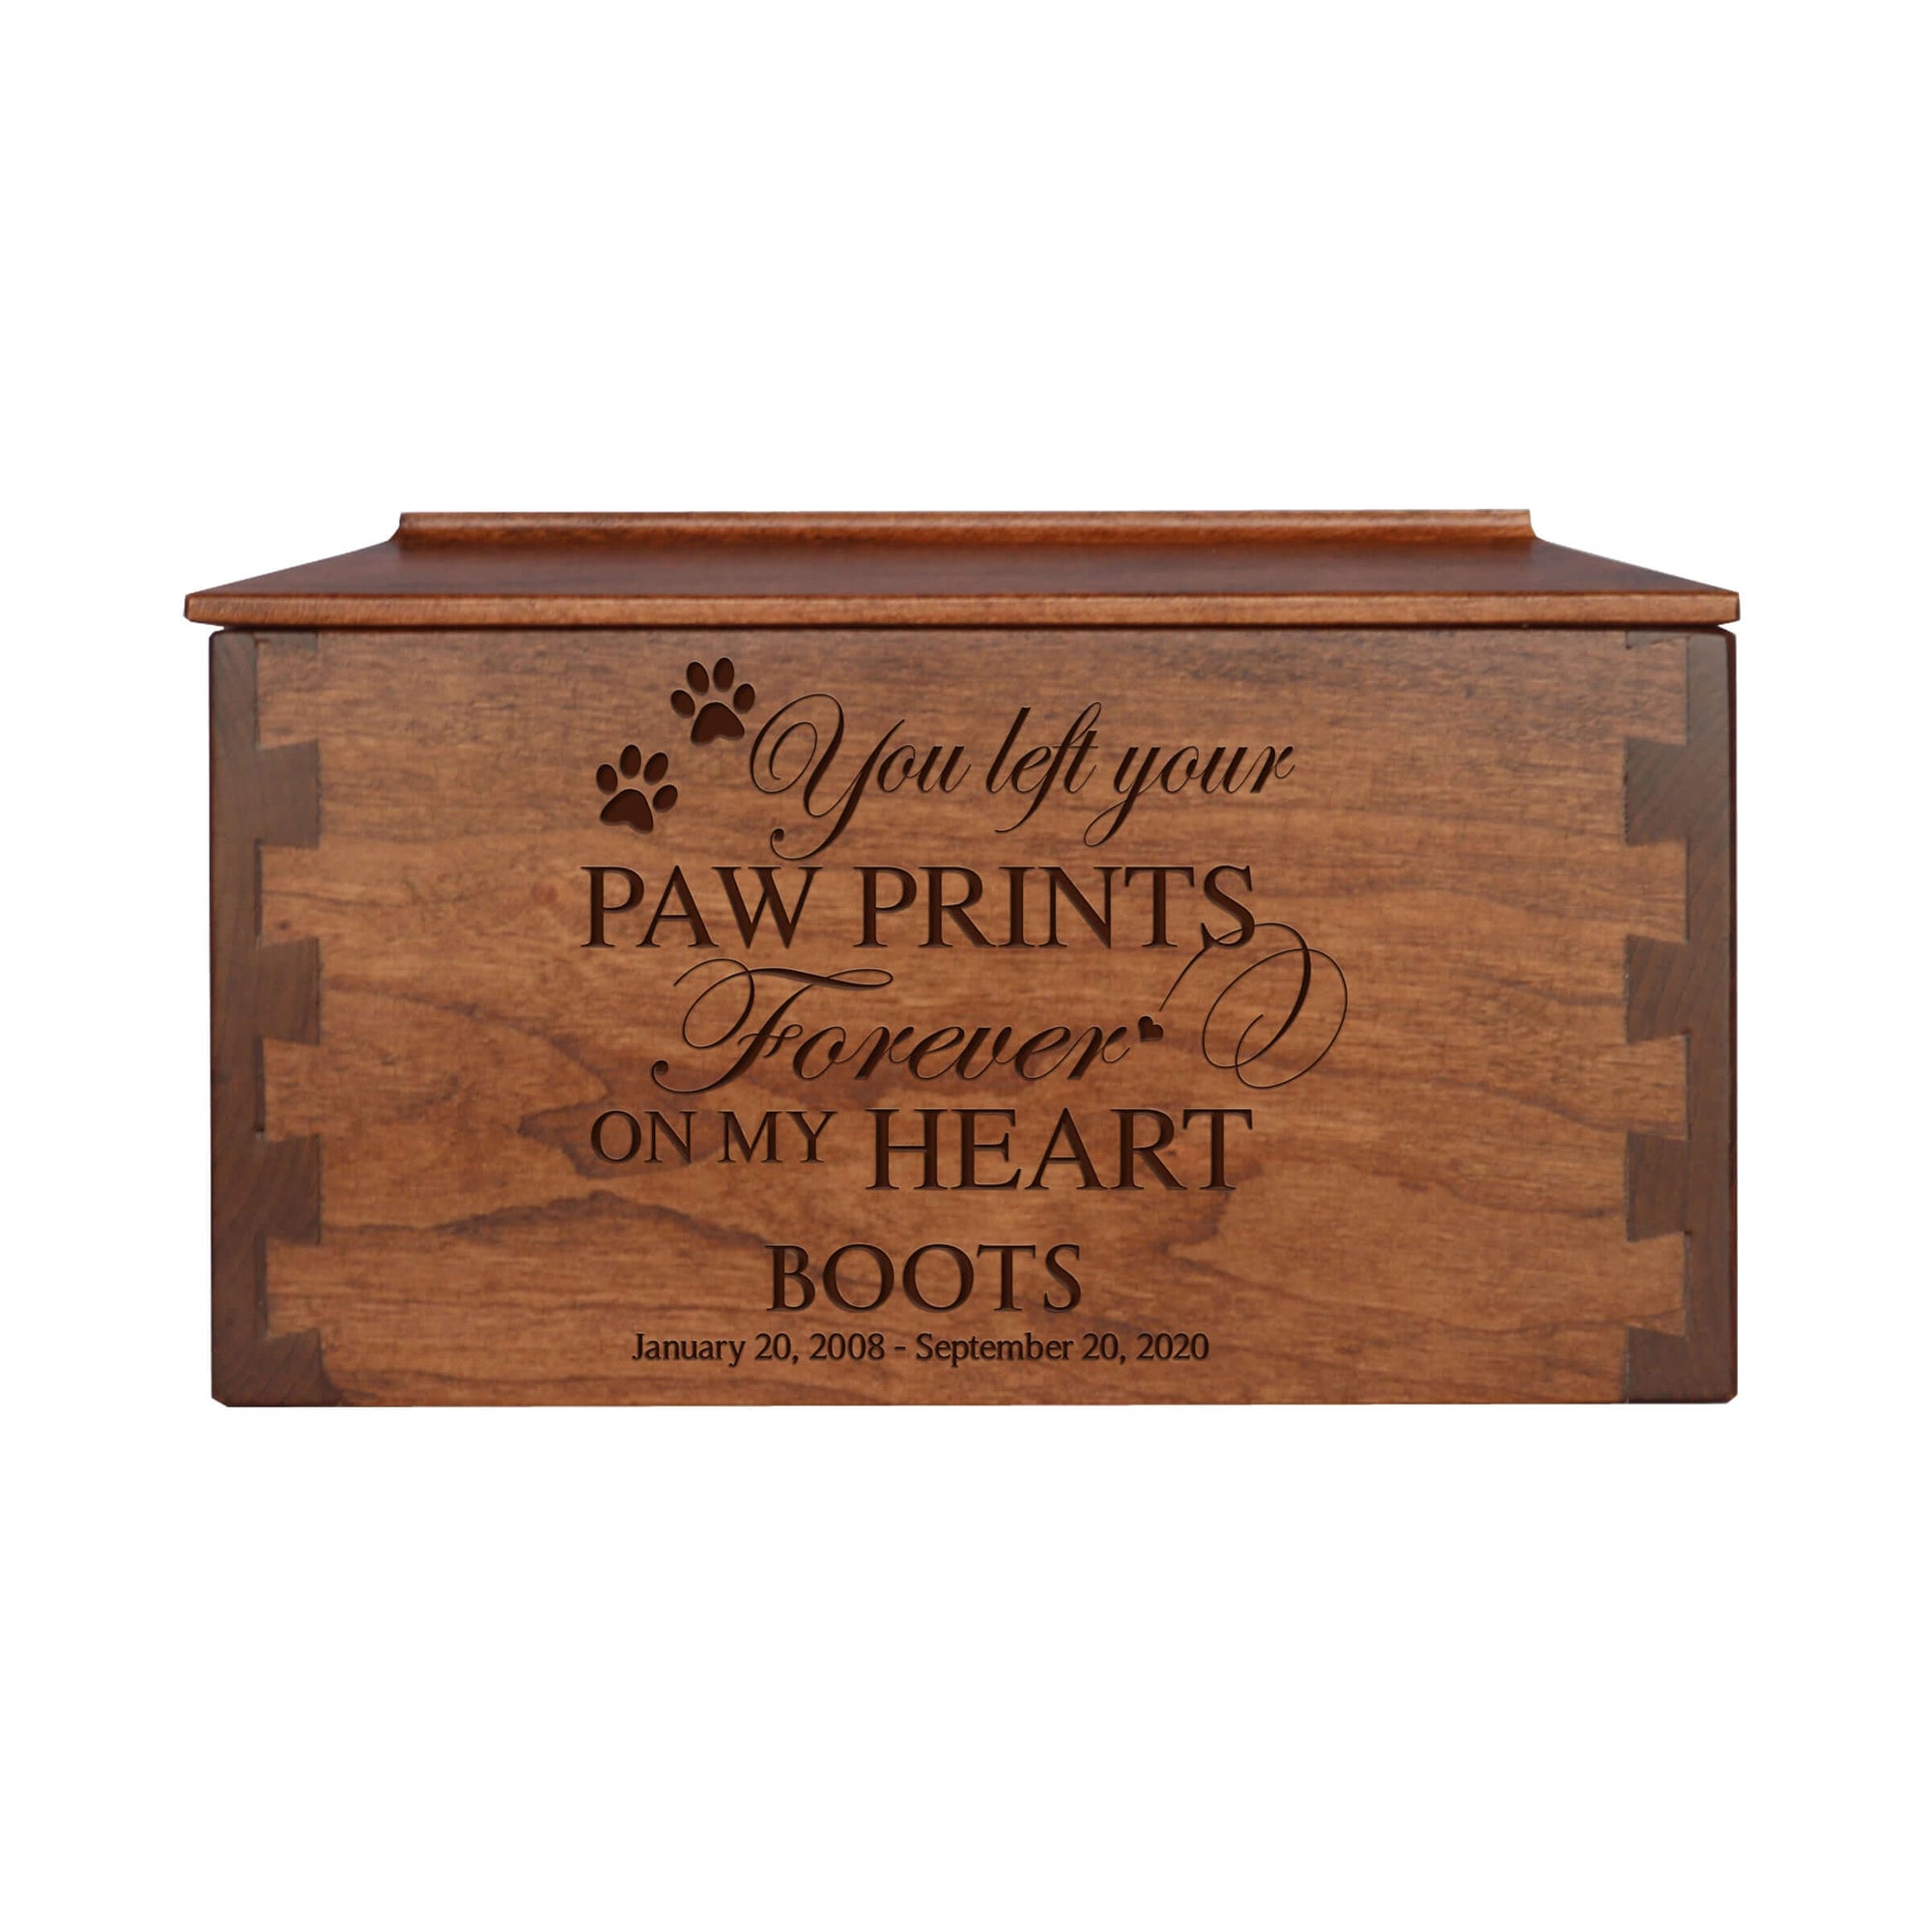 Pet Memorial Dovetail Cremation Urn Box for Dog or Cat - You Left Your Paw Prints